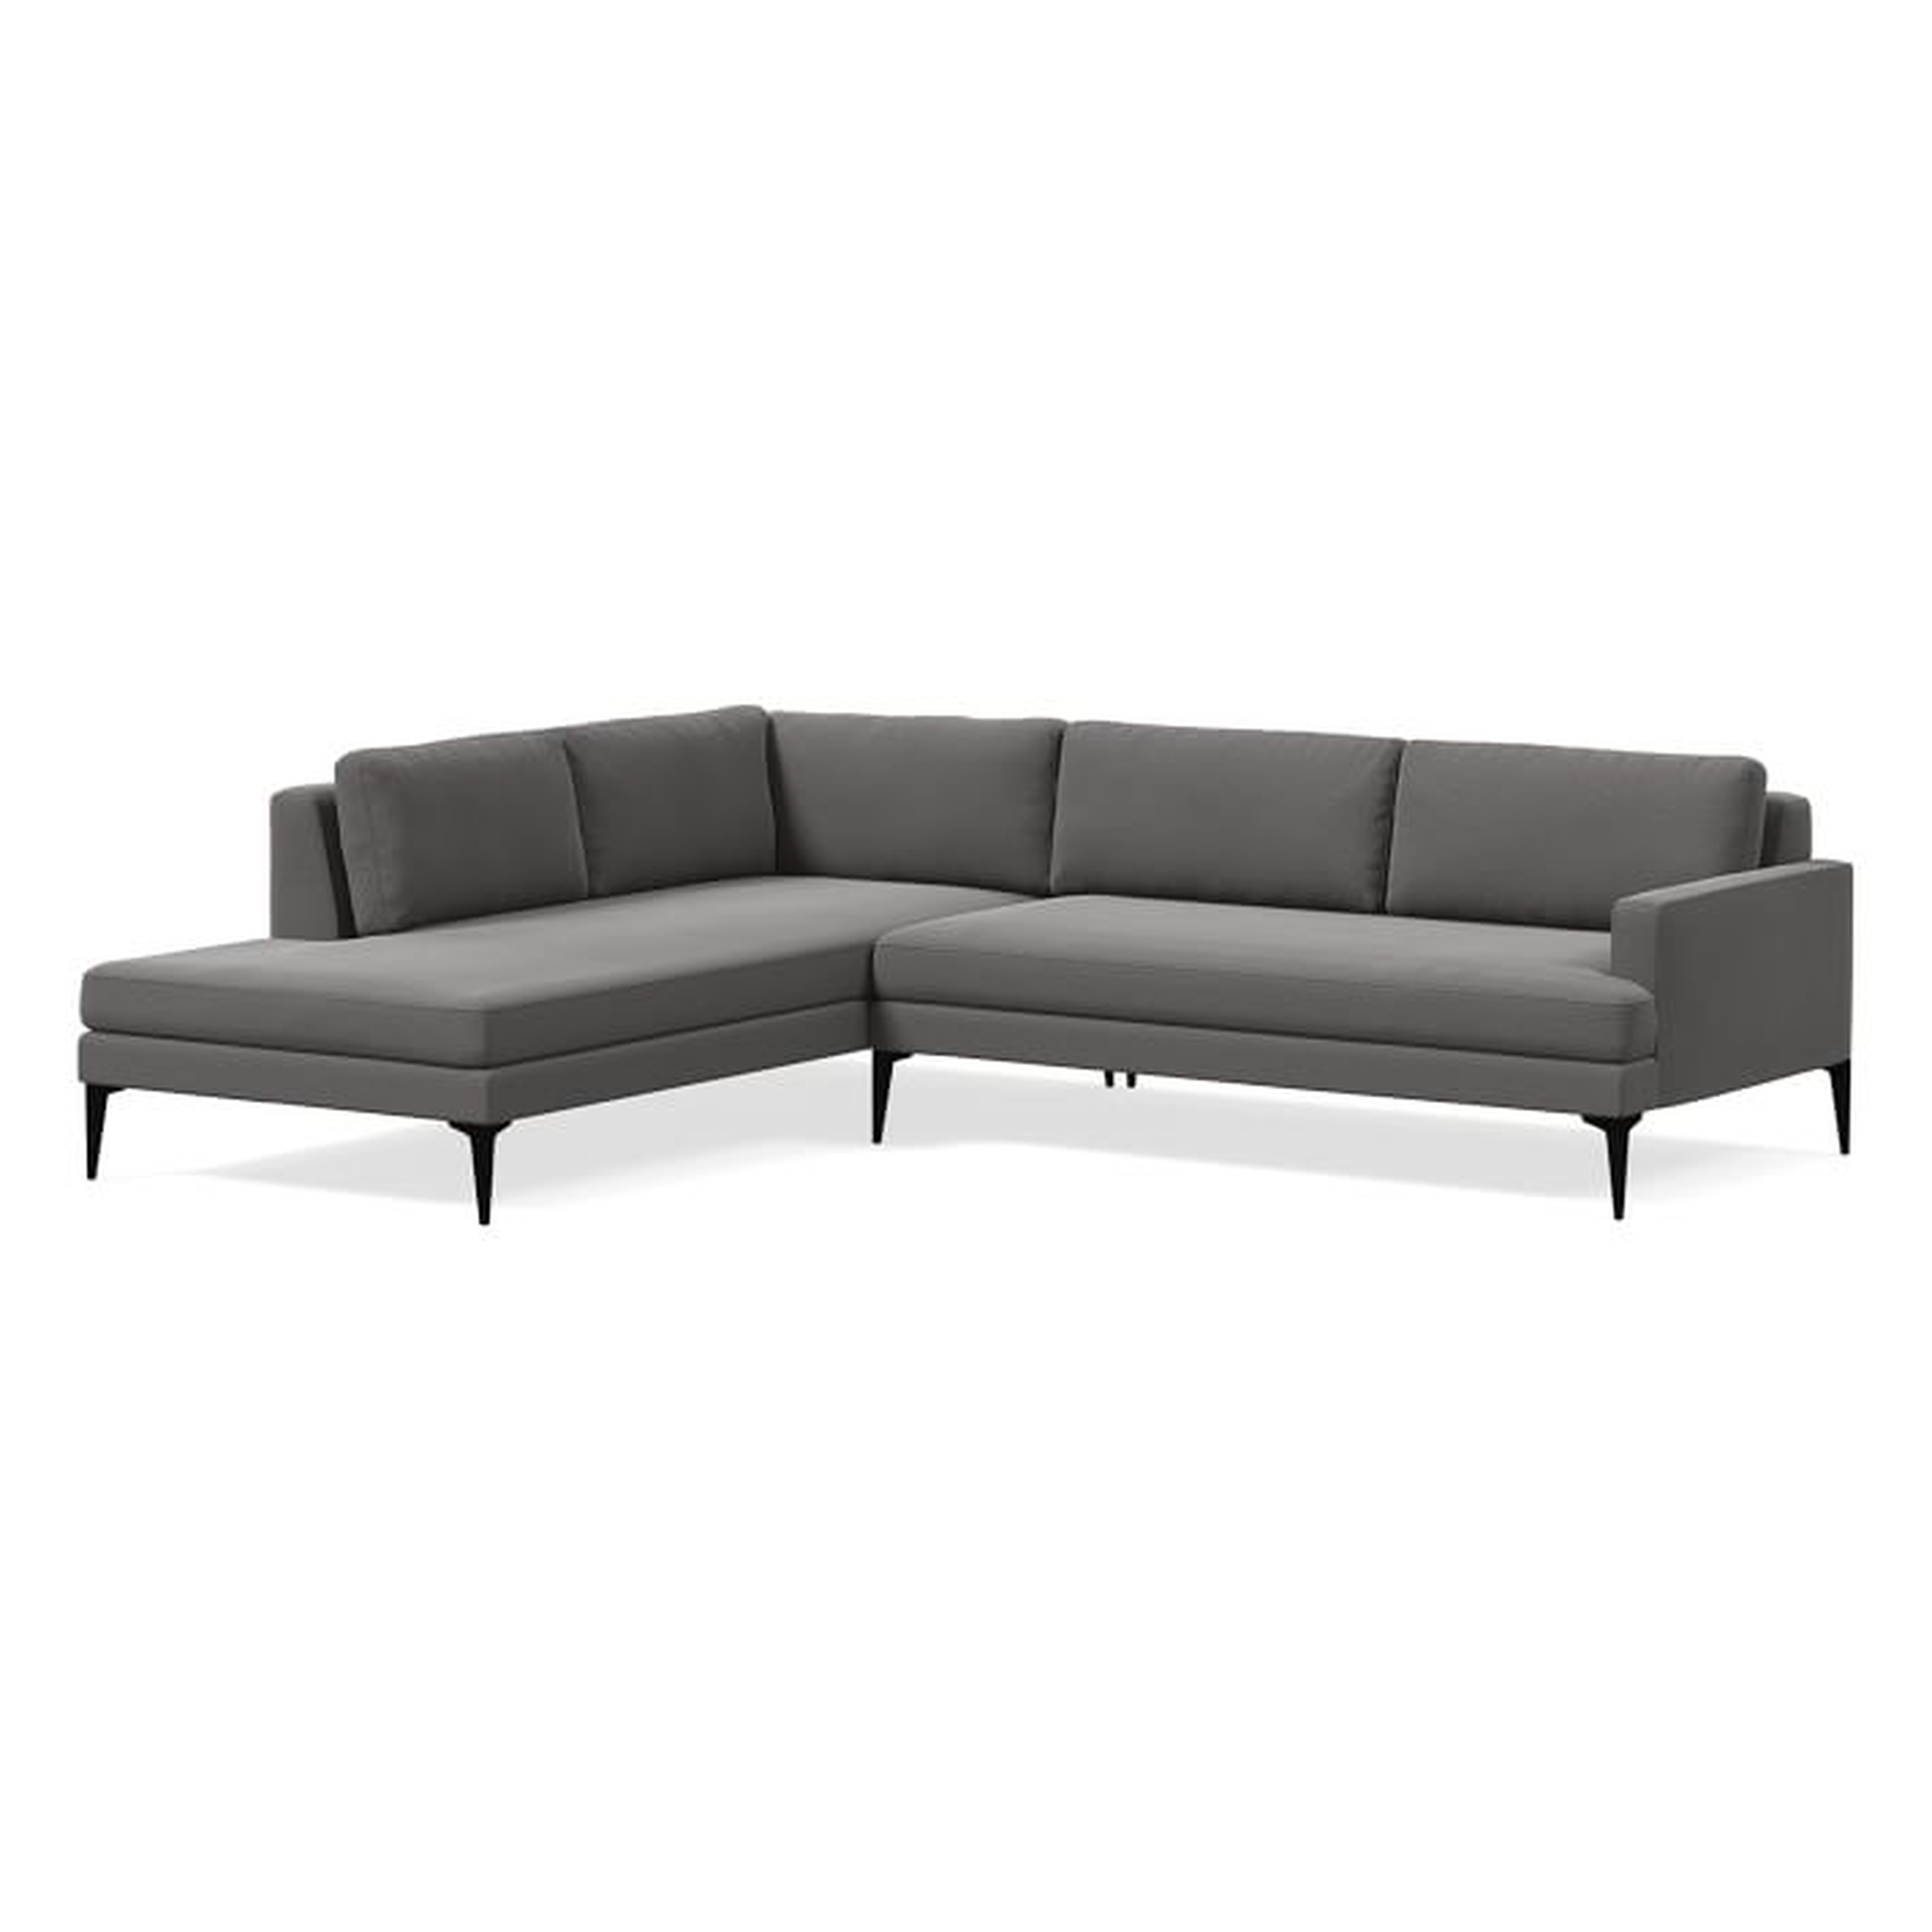 Andes 2-Seat Right Arm 2-Piece Terminal Chaise Sectional, Eco Weave, Dove, Blackened Brass - West Elm